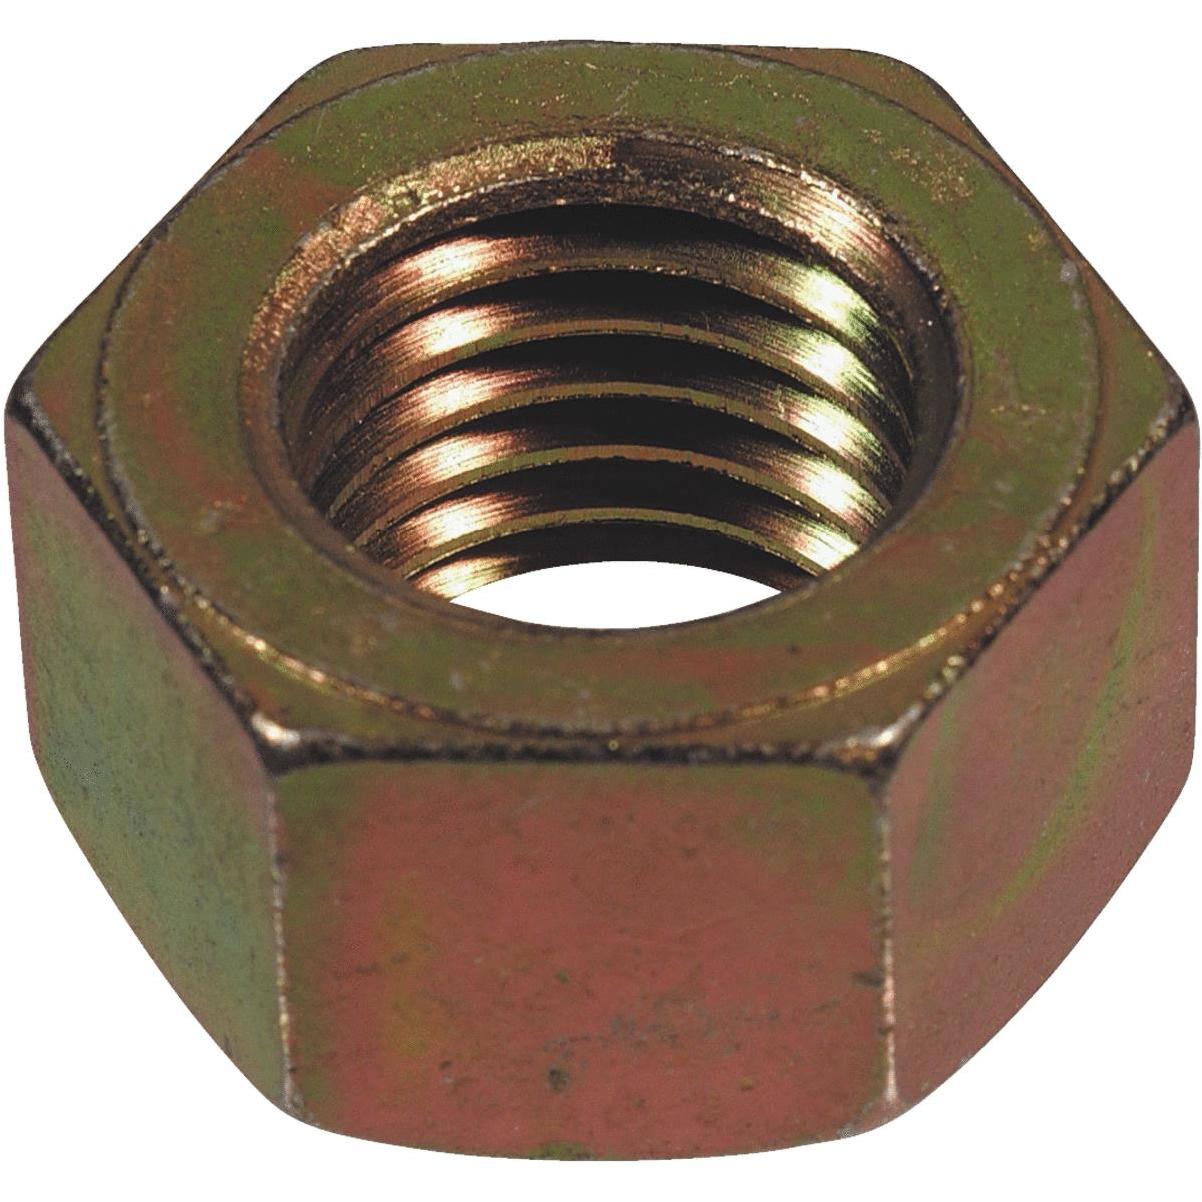 Hillman 5/16-in x 18 Brass Wood Insert Nut in the Lock Nuts department at